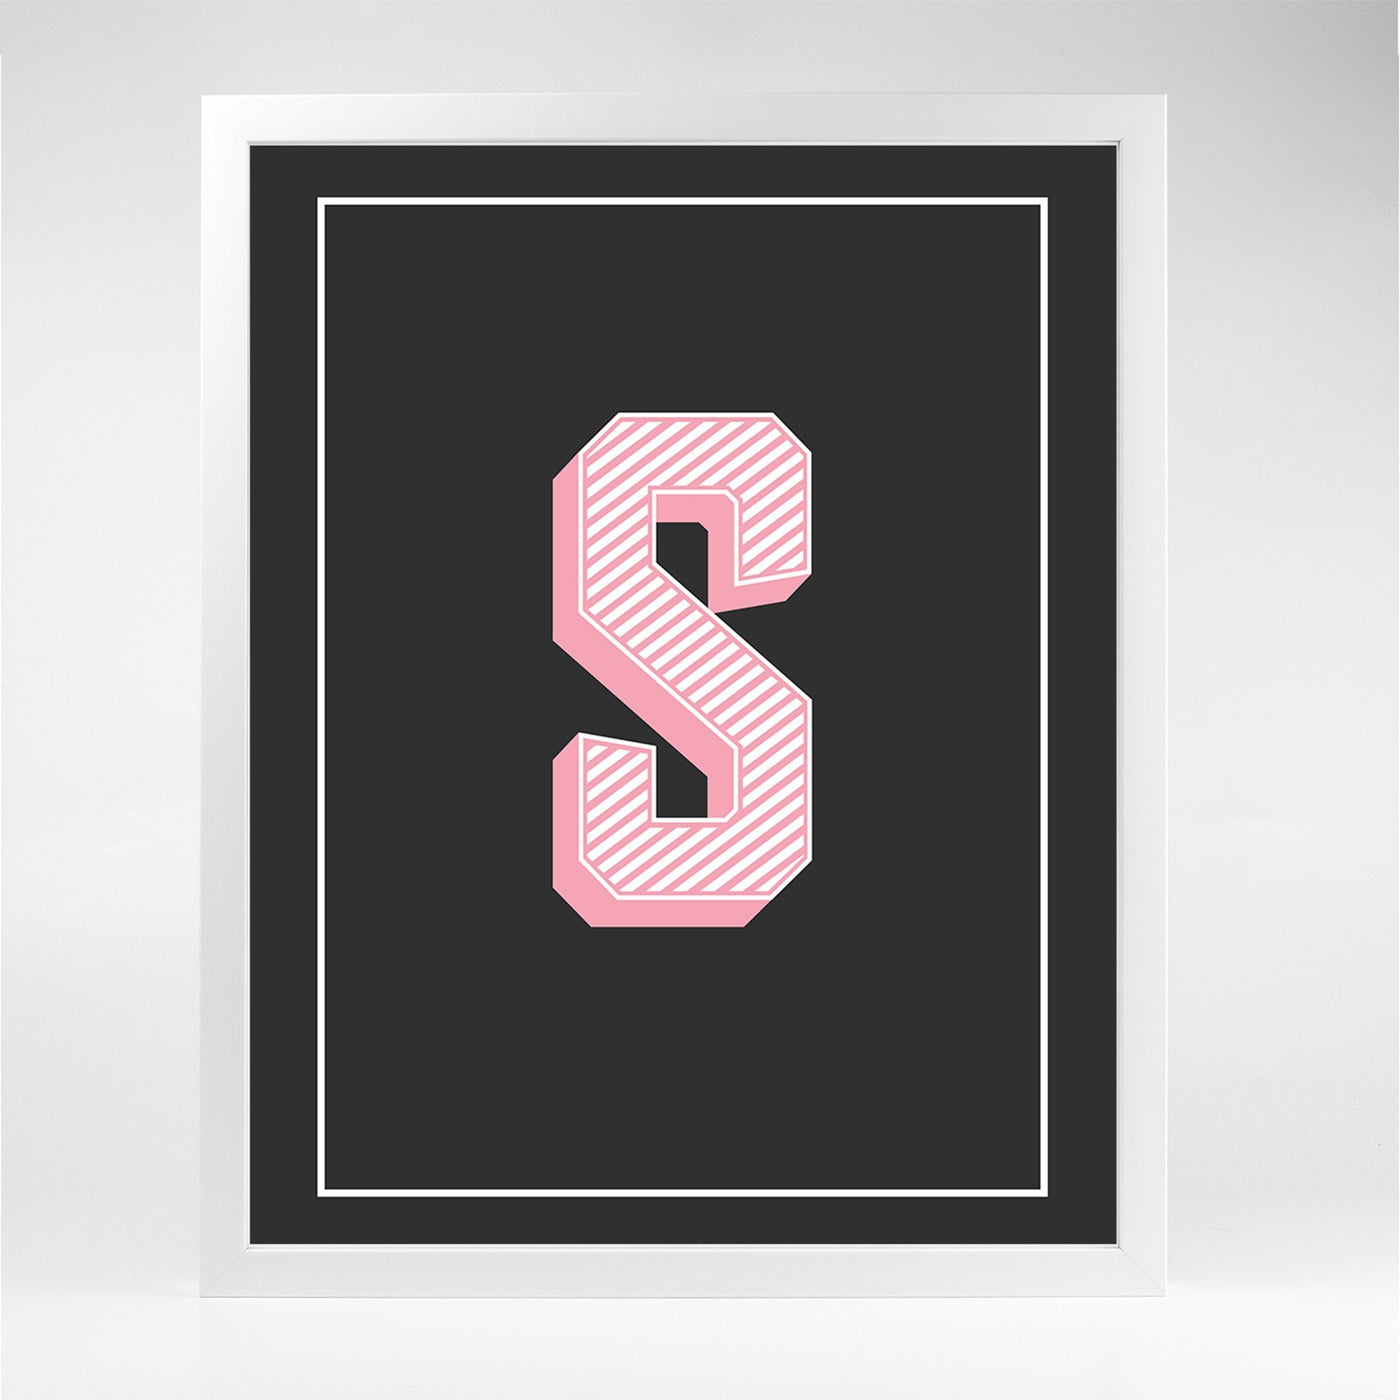 Gallery Prints R The Letter Series Katie Kime